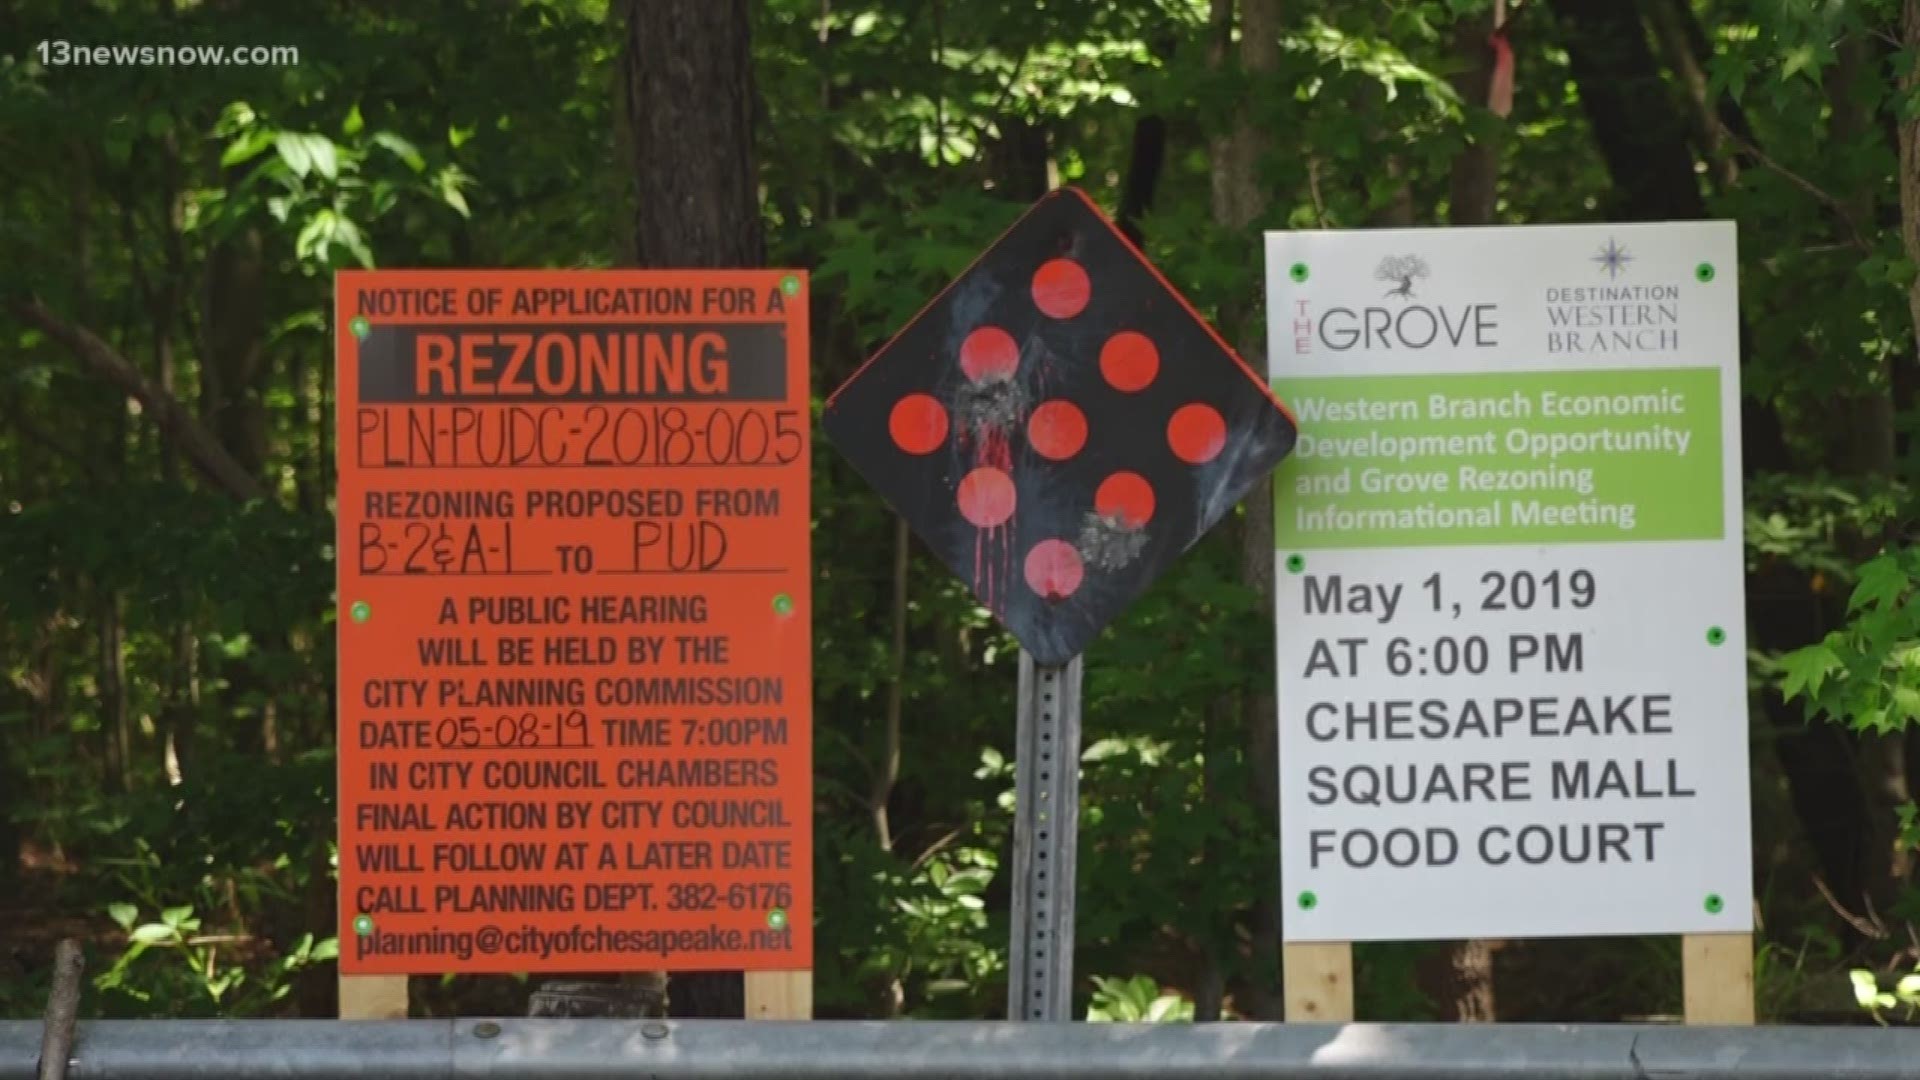 Supporters of the "Grove" project believe it will bring jobs while those against the project think it will cause traffic, flooding and overcrowd the schools.